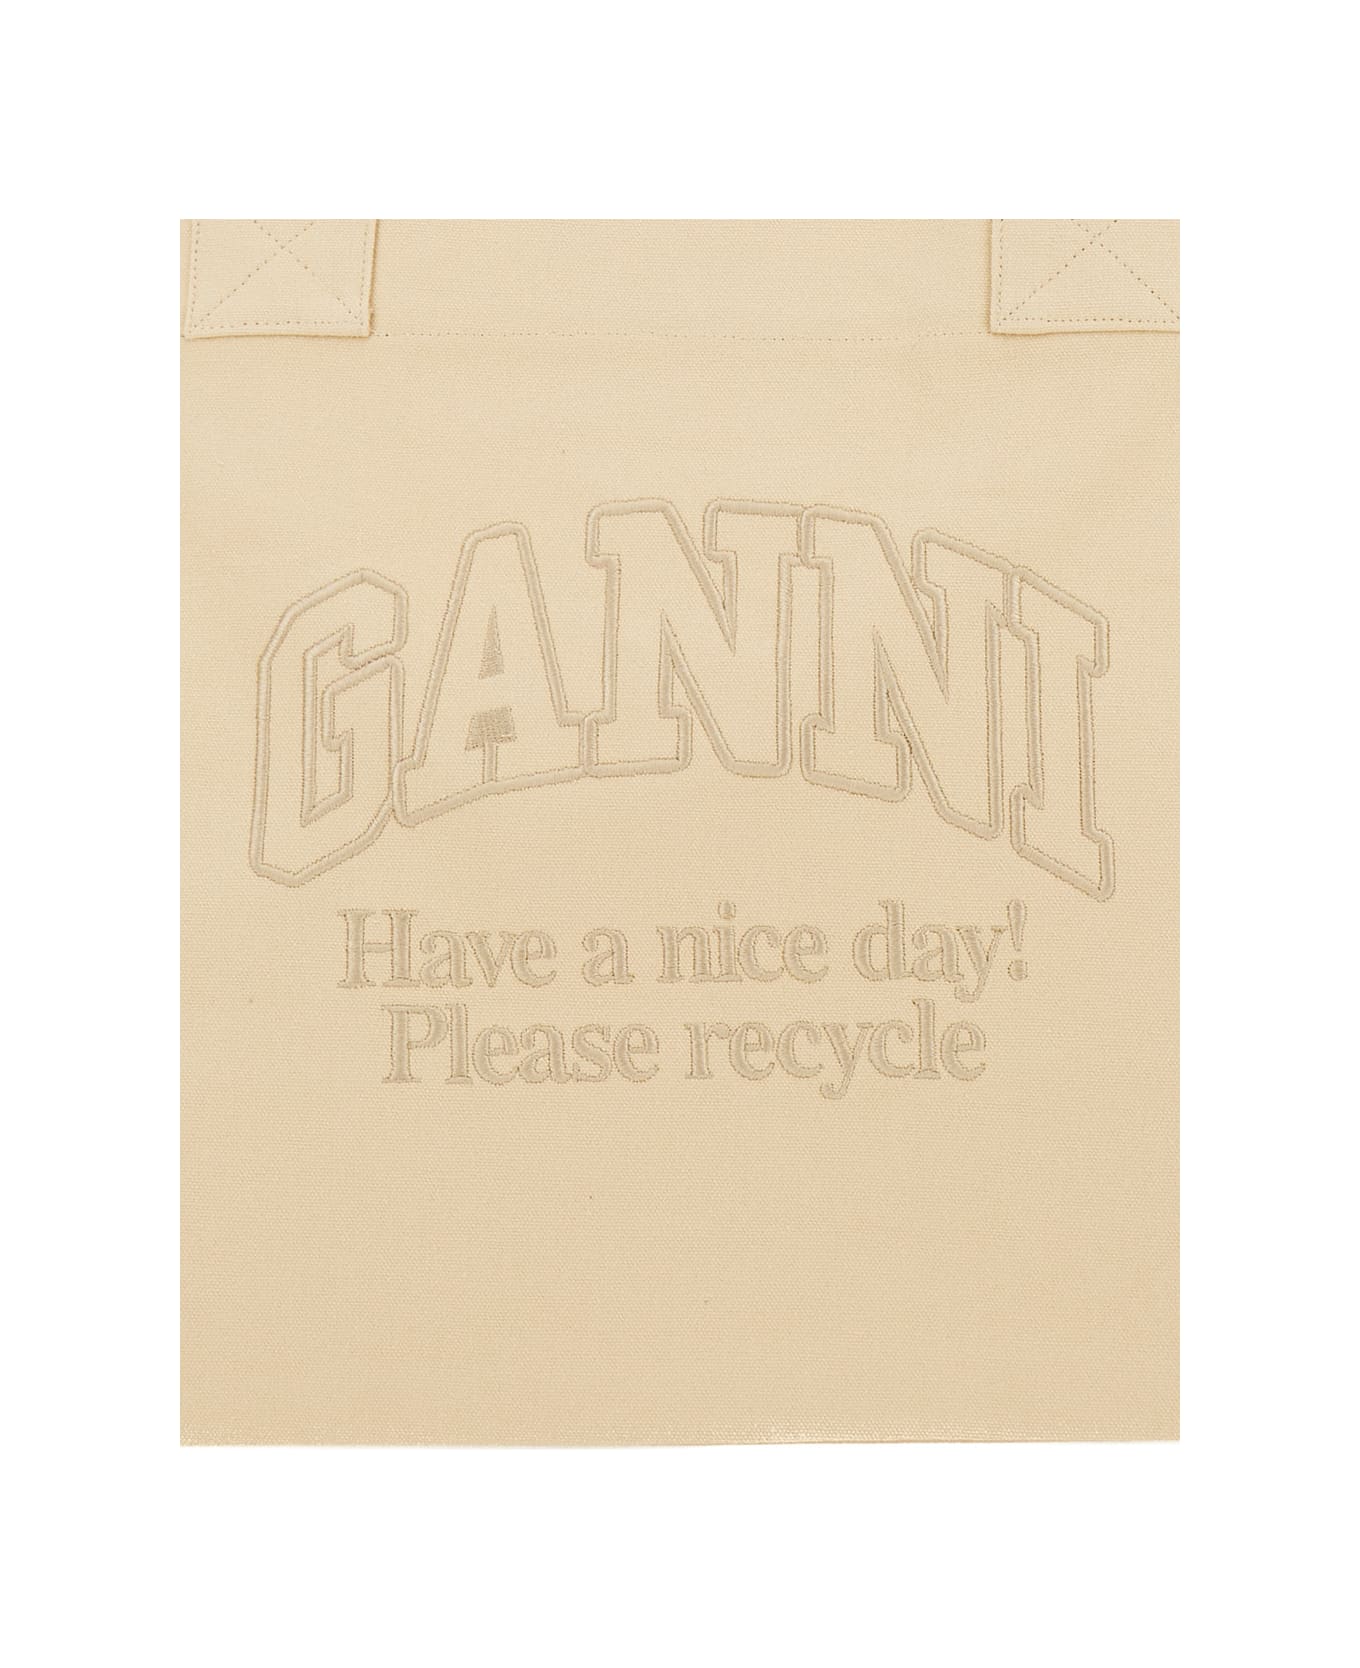 Ganni 'xxl' Beige Tote Bag With Tonal Embroidery In Recycled Cotton Woman - Beige